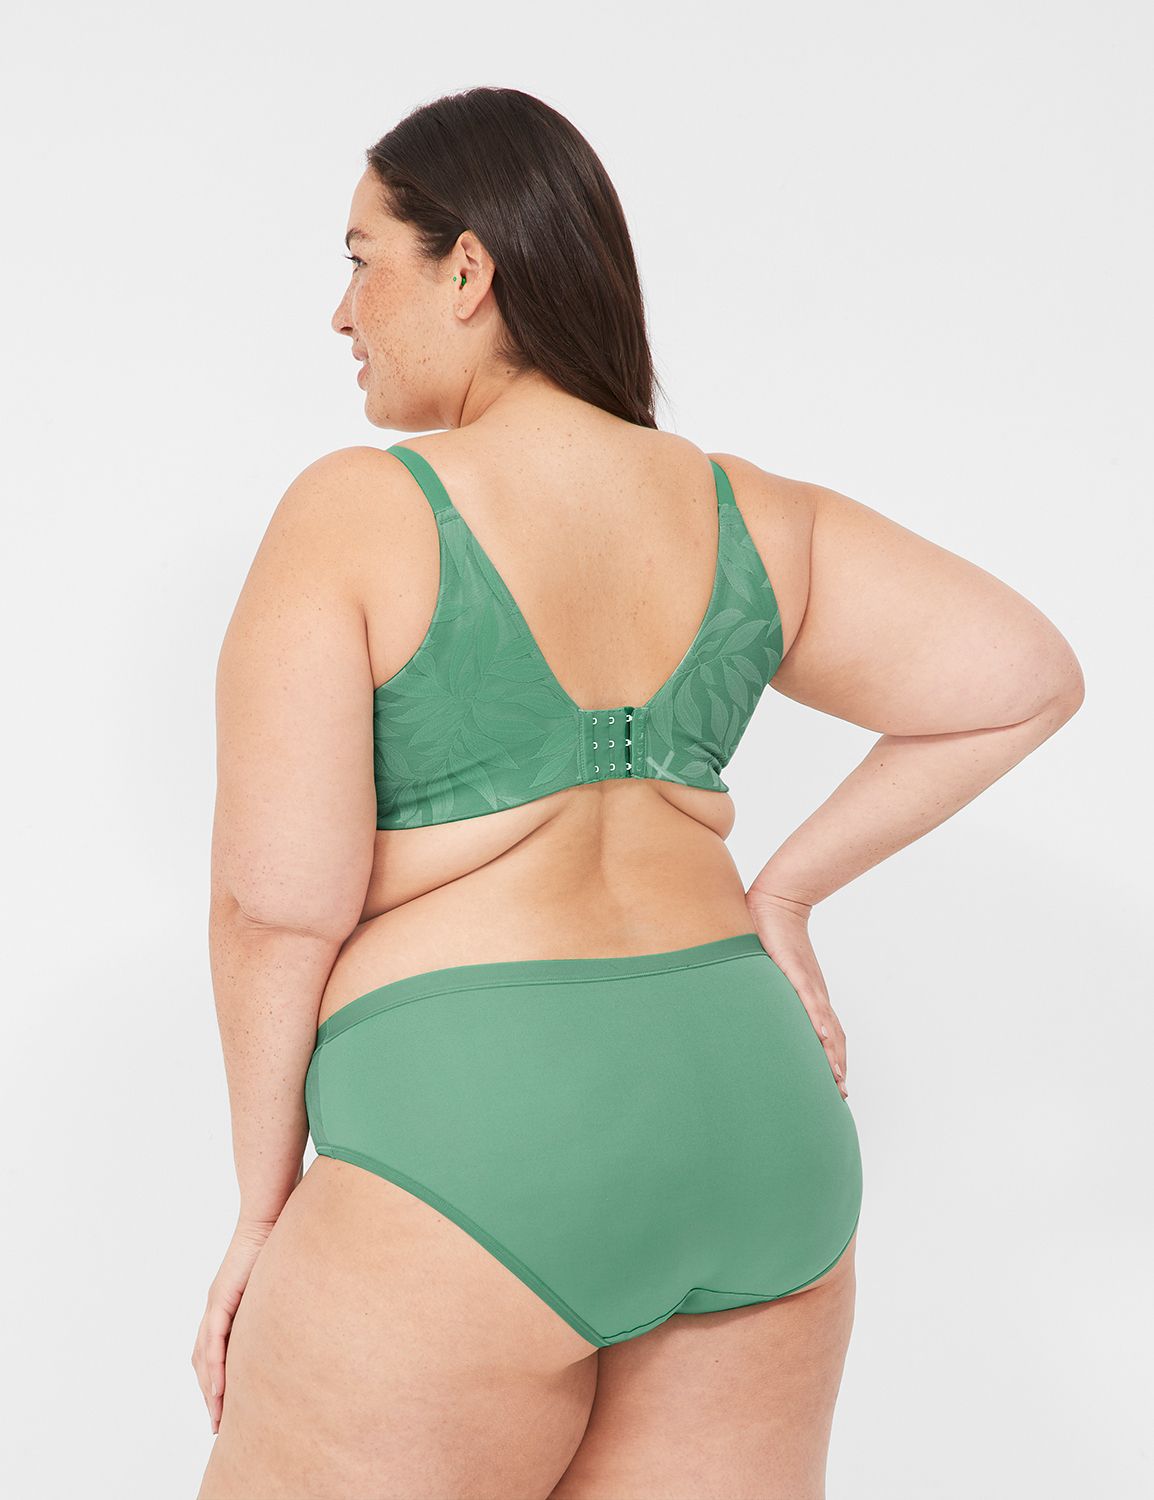 ▷ Cacique green bra with lace sides, women's size 42DD - CENTRO COMERCIAL  CASTELLANA 200 ◁